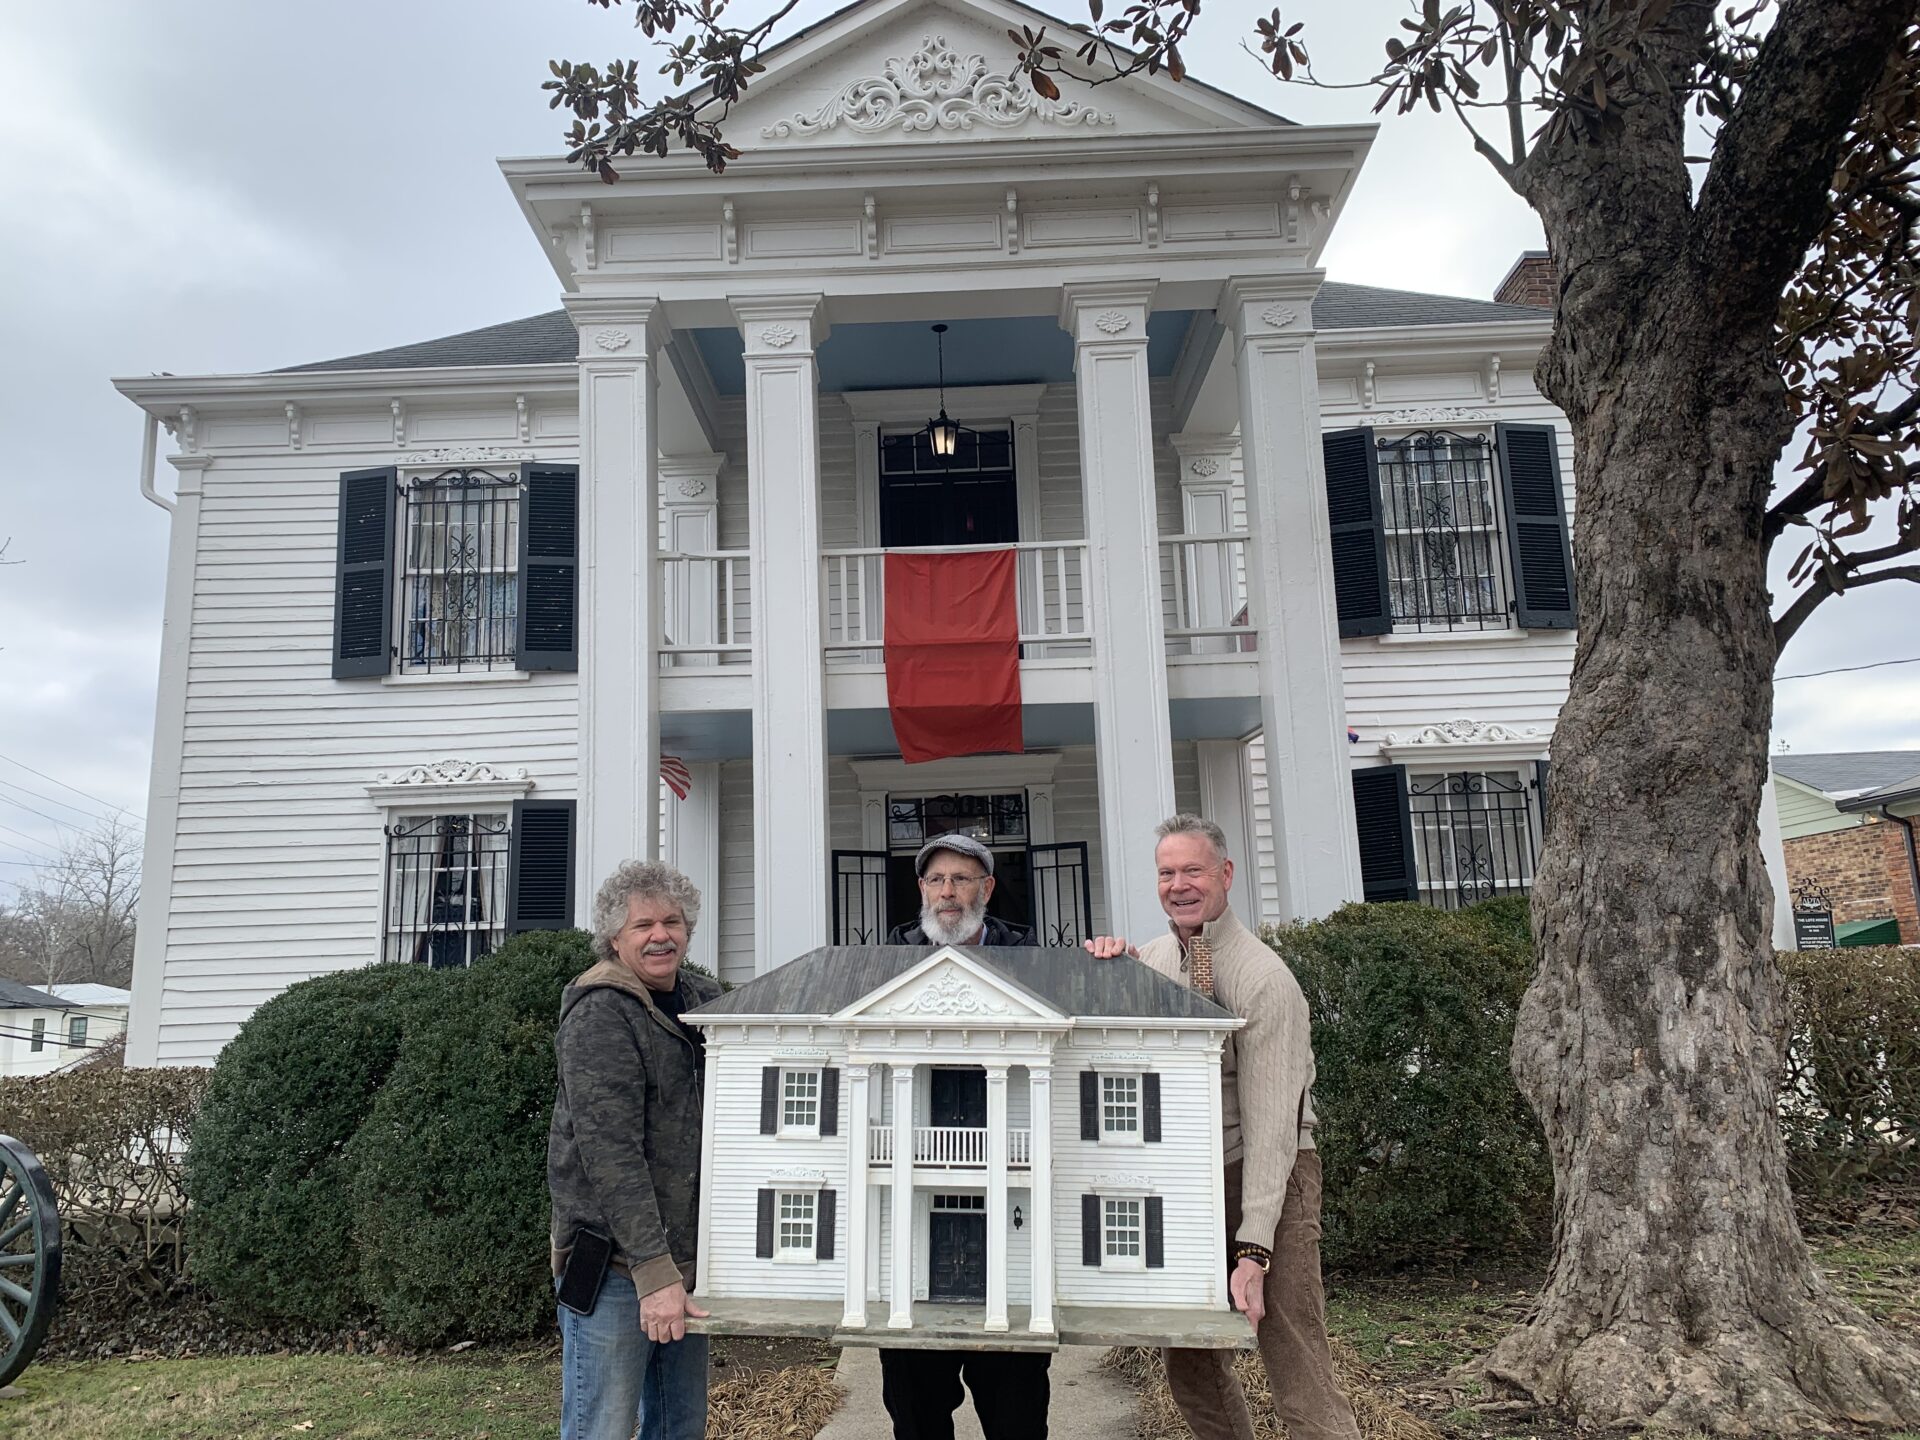 The Lotz House in downtown Franklin, Tenn., and miniature facade of the historic Lotz House in downtown Franklin, TN by local artist Alan Buck.